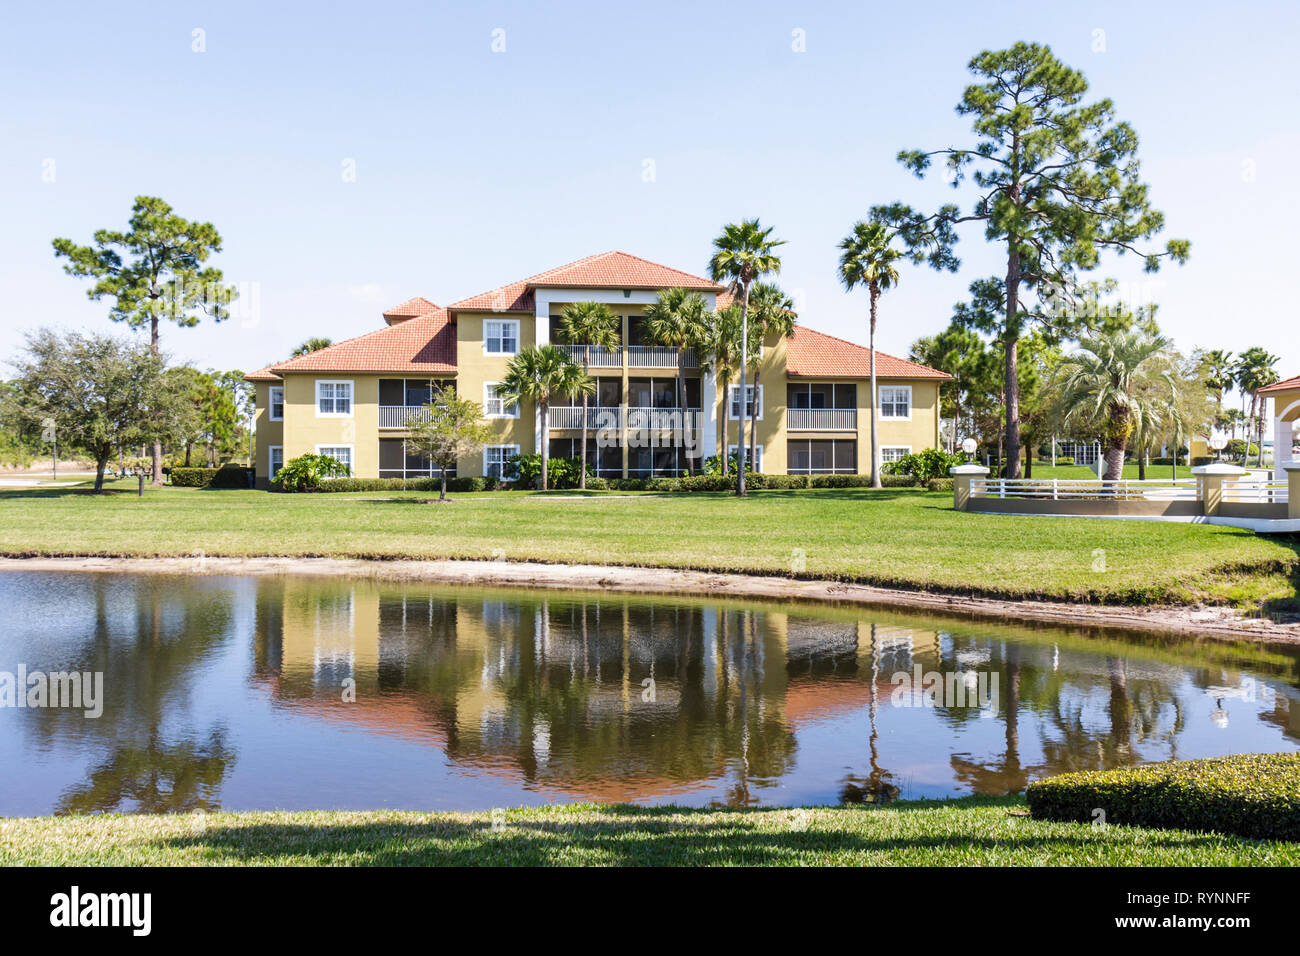 Port St. Saint Lucie Florida,Sheraton PGA Vacation Resort,timeshare,entrance,front,building,grounds,golf course community,lands Stock Photo